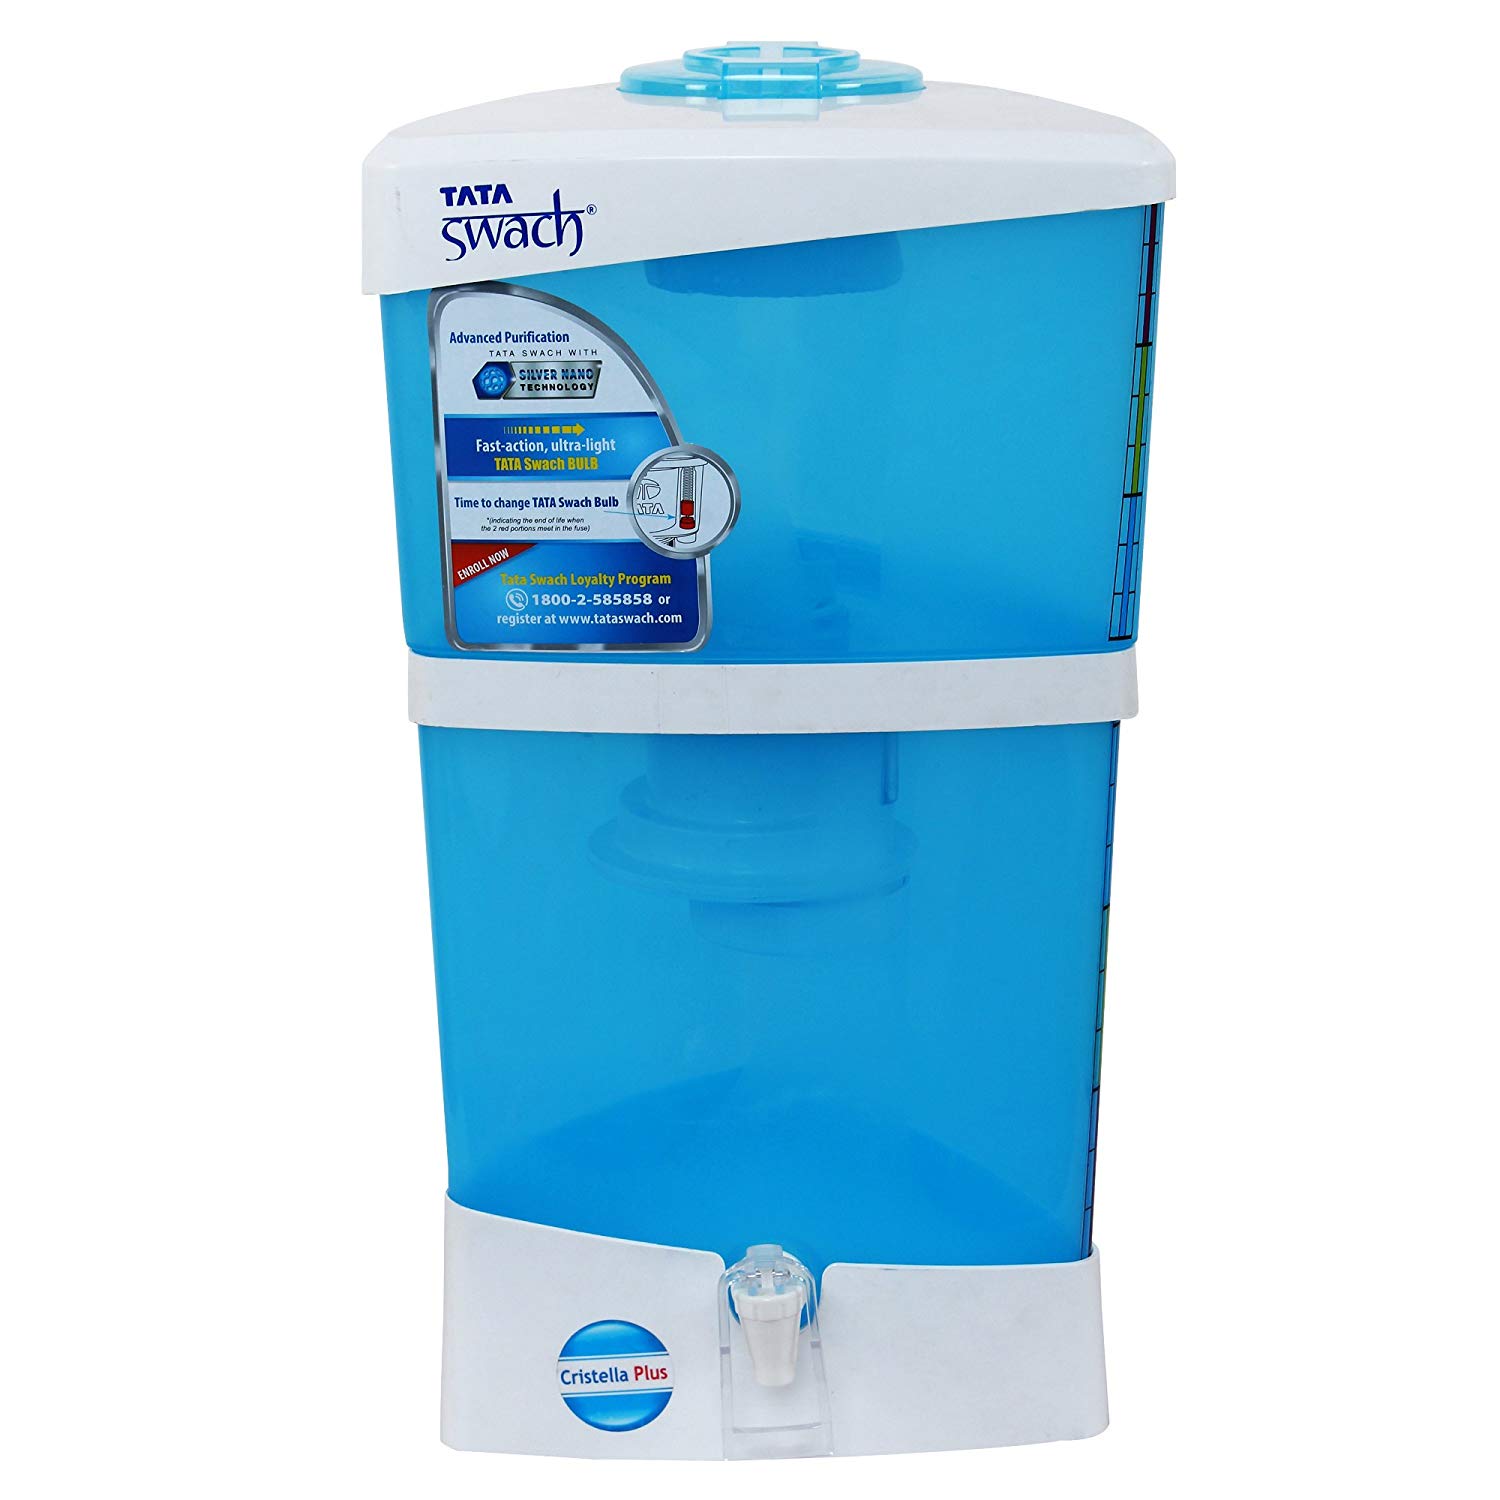 Tata Swach Viva Silver UV+UF 6 L Water Purifier Review